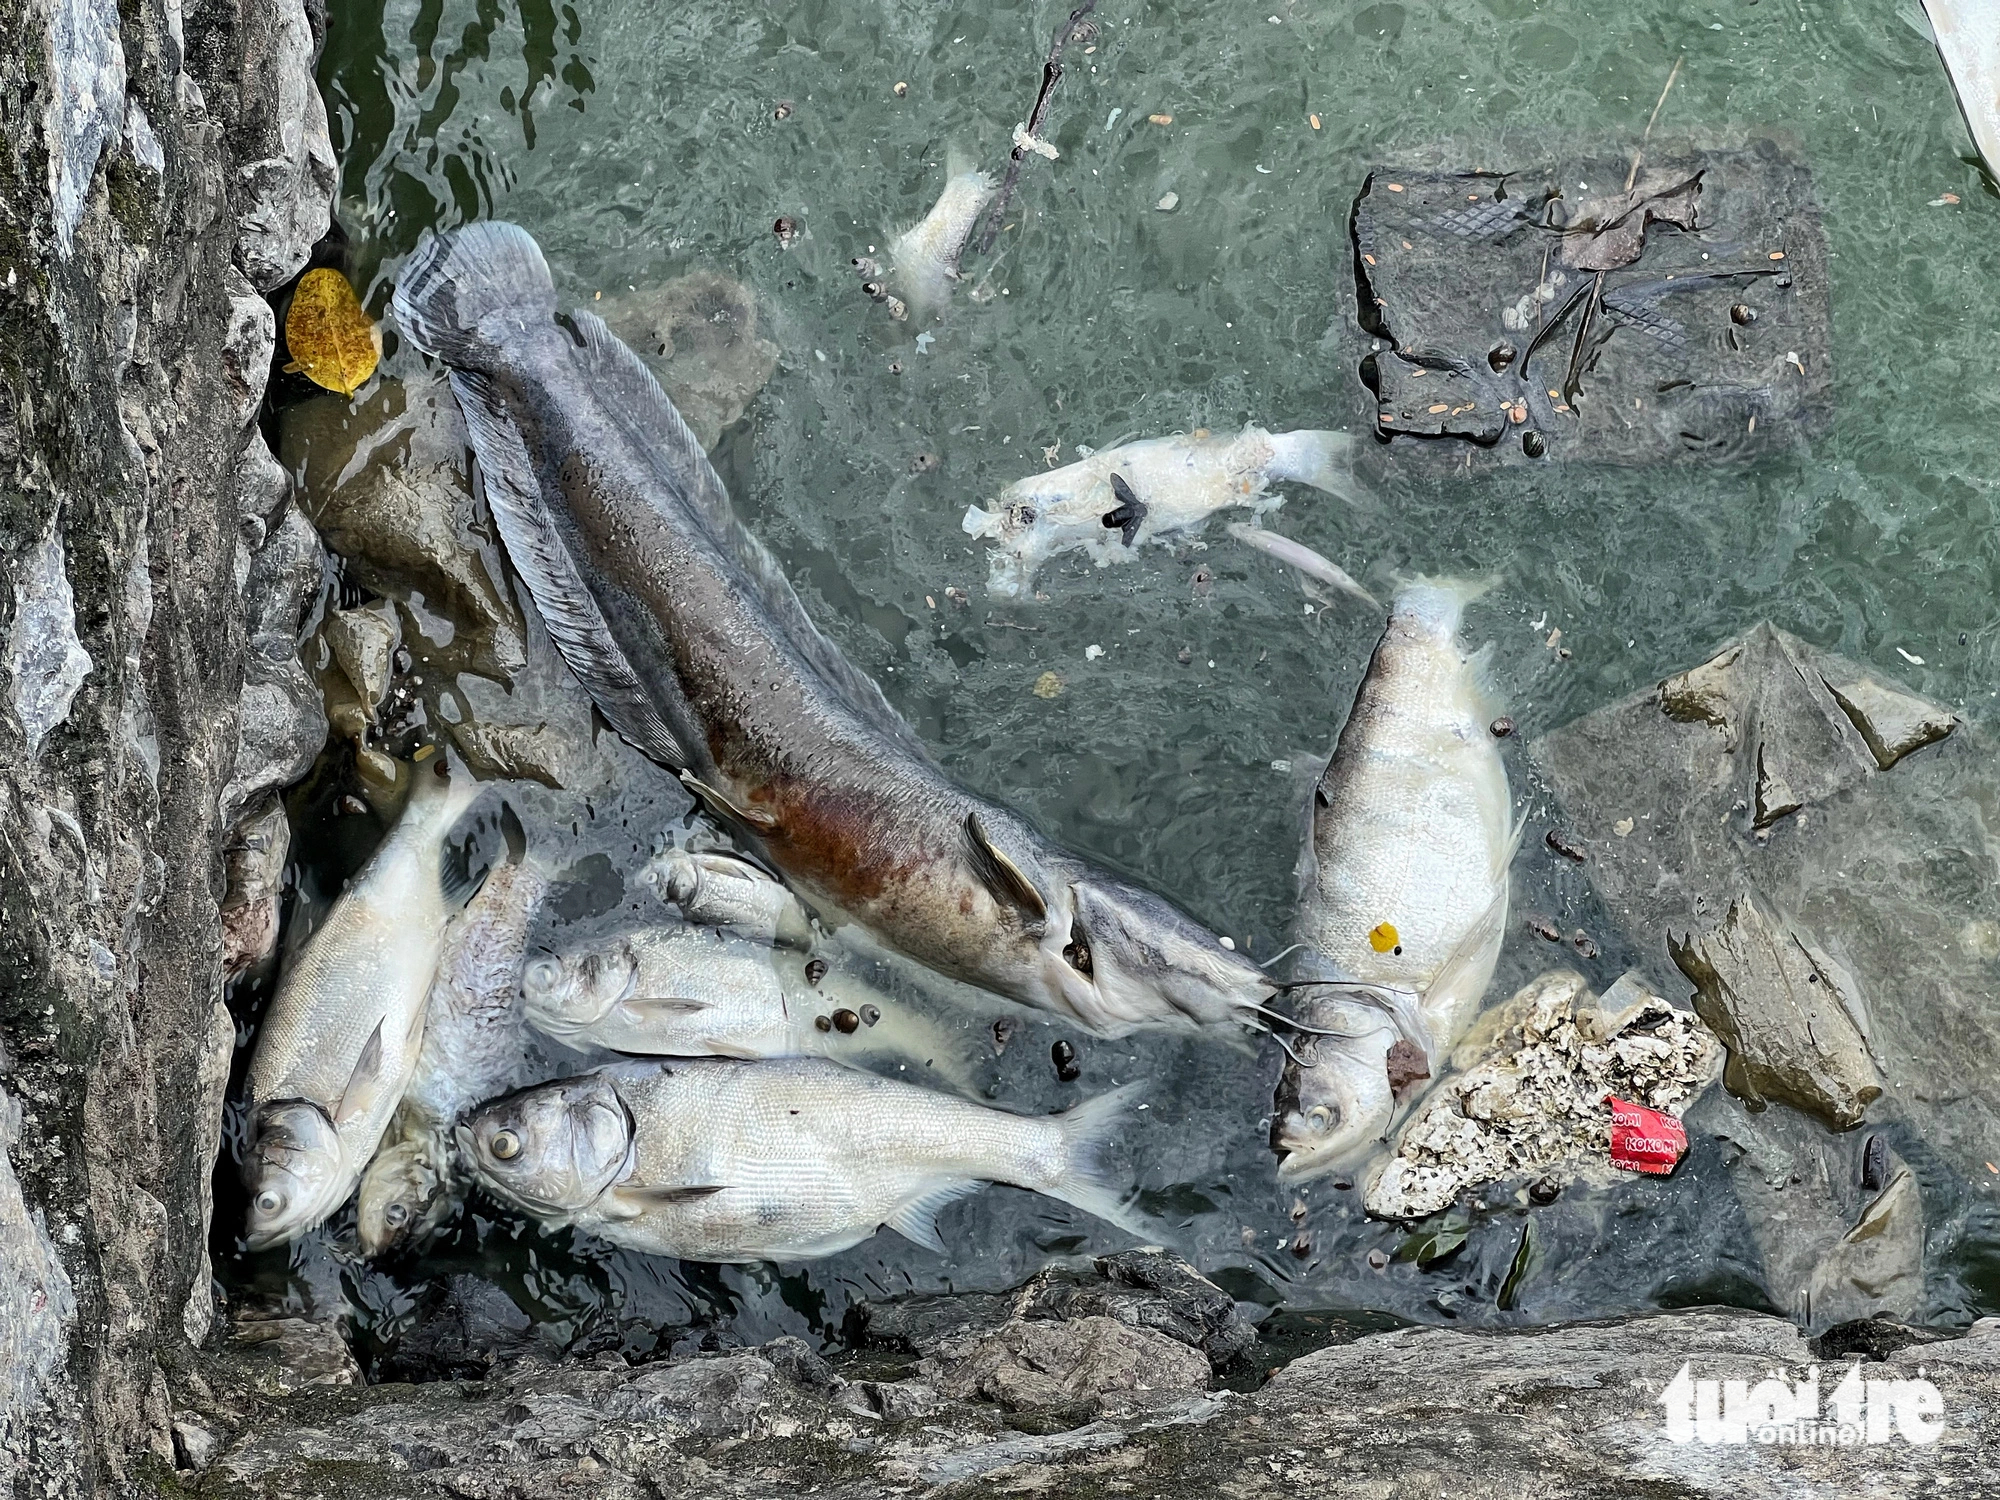 Dead fish found floating in Hanoi's West Lake during season change